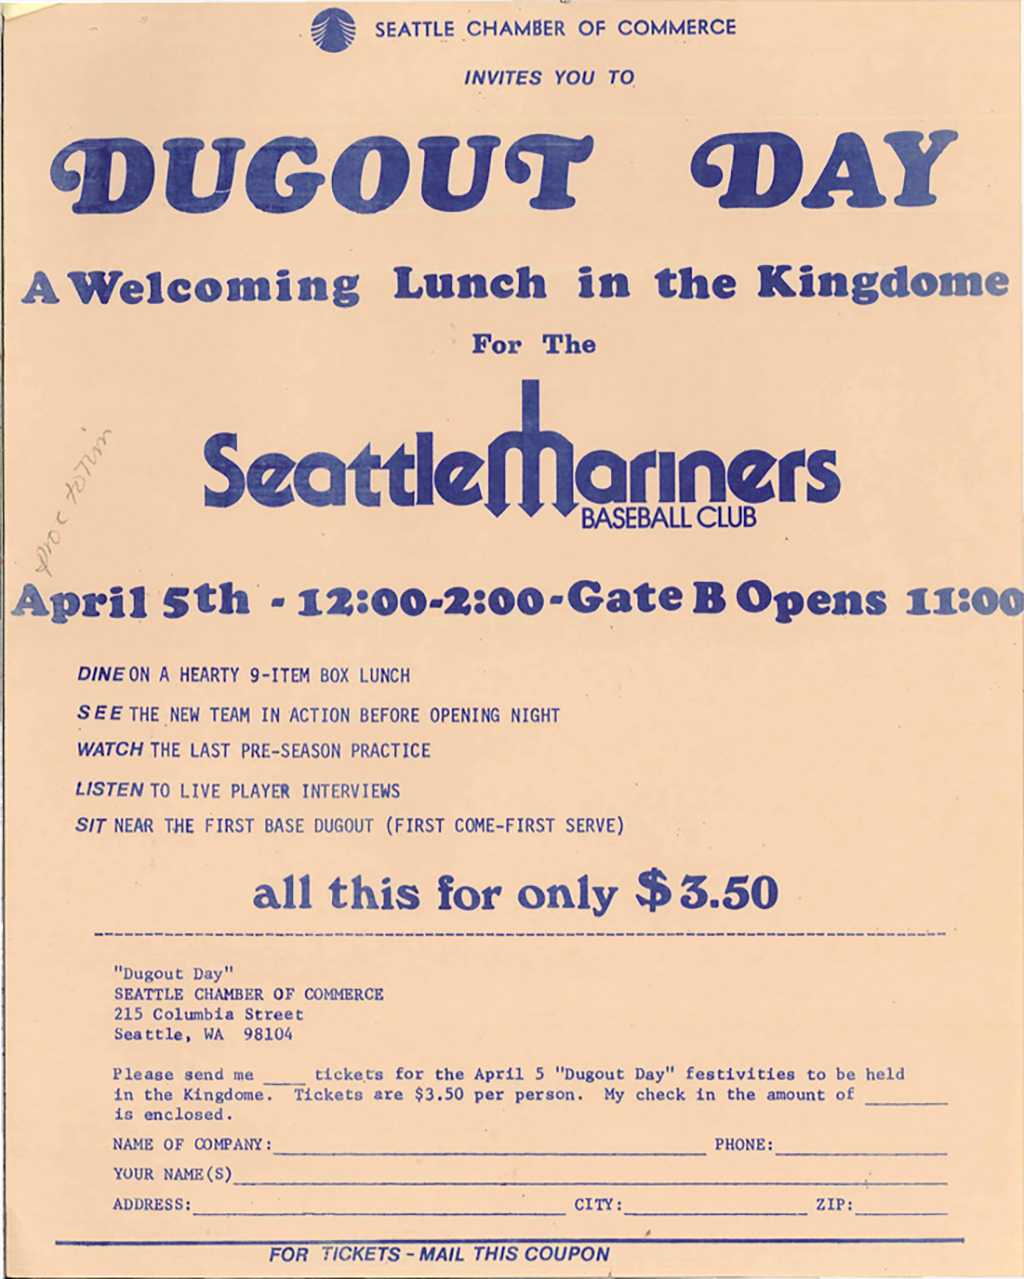 In honor of opening day, here is my inaugural 1977 Mariners game